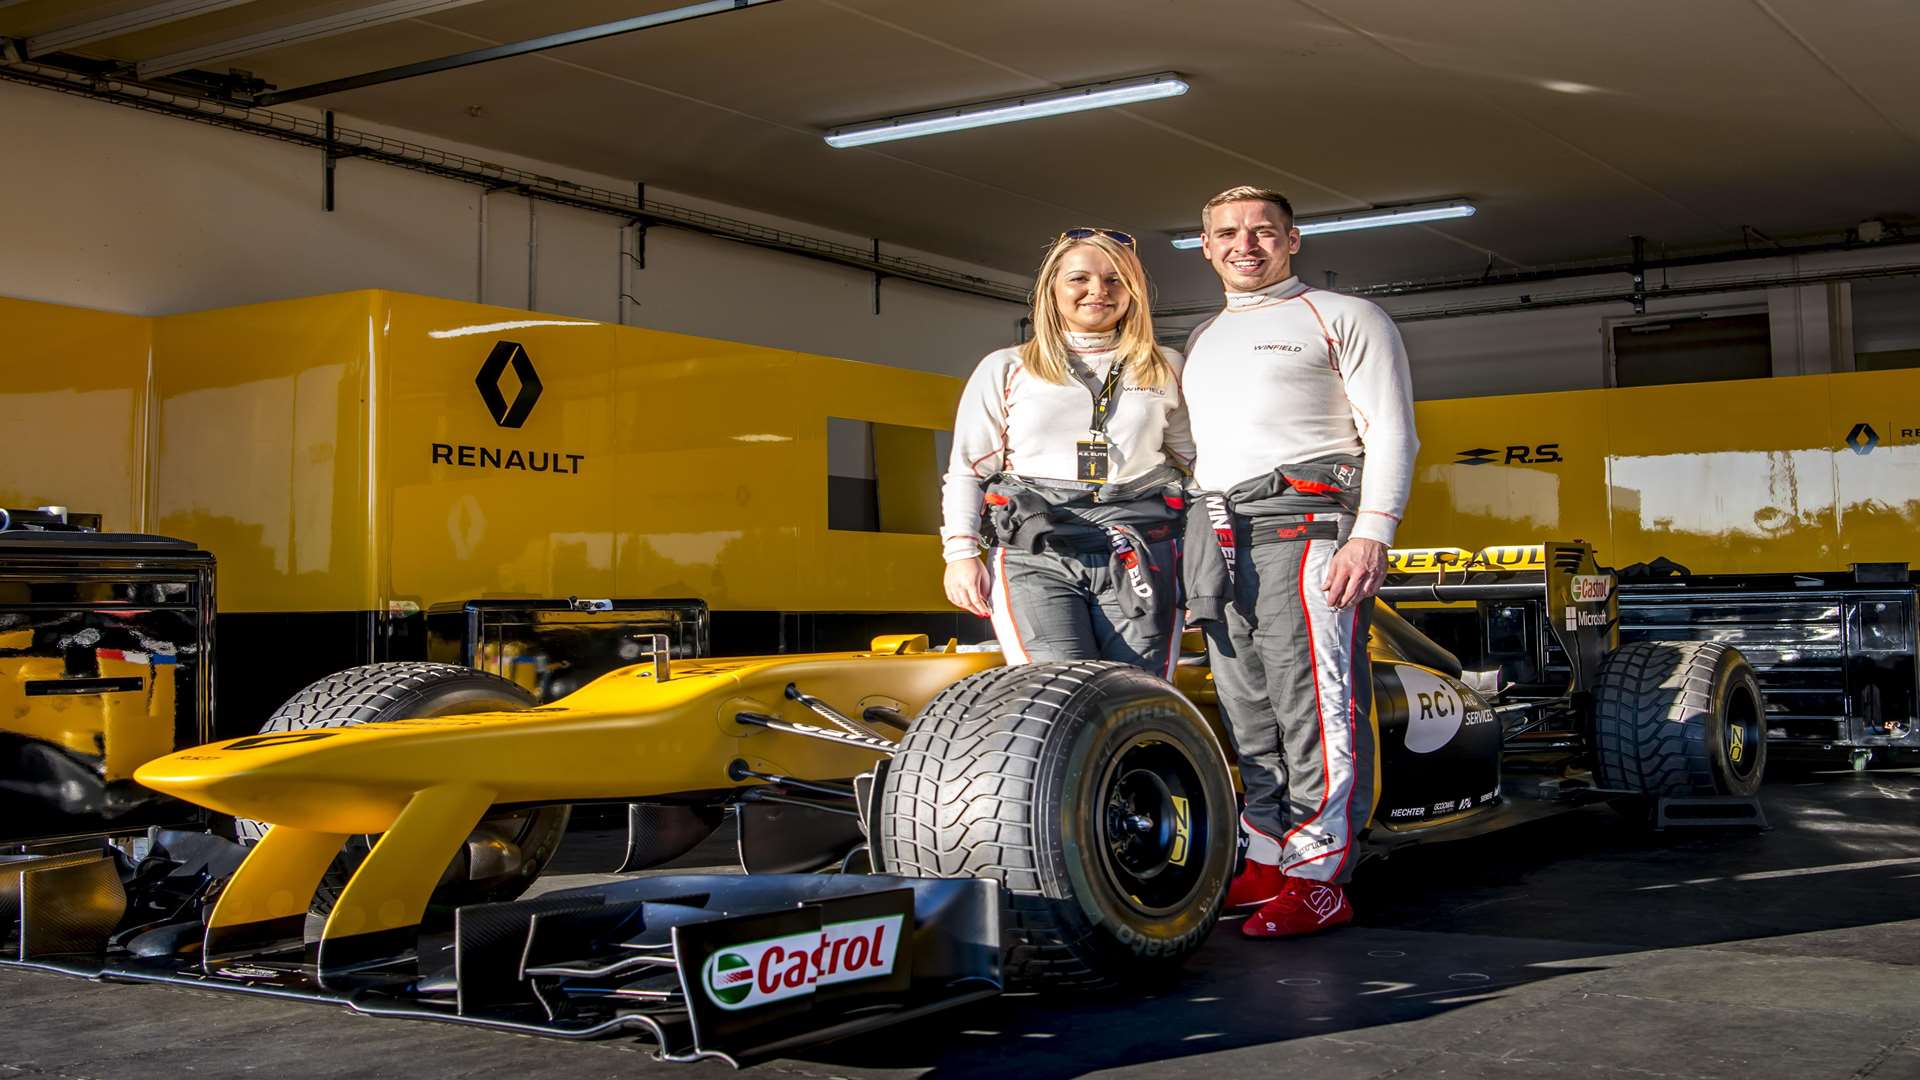 Matthew Creed proposed to his girlfriend Hayley Melen during a Renault Sport Racing Driving Experience day